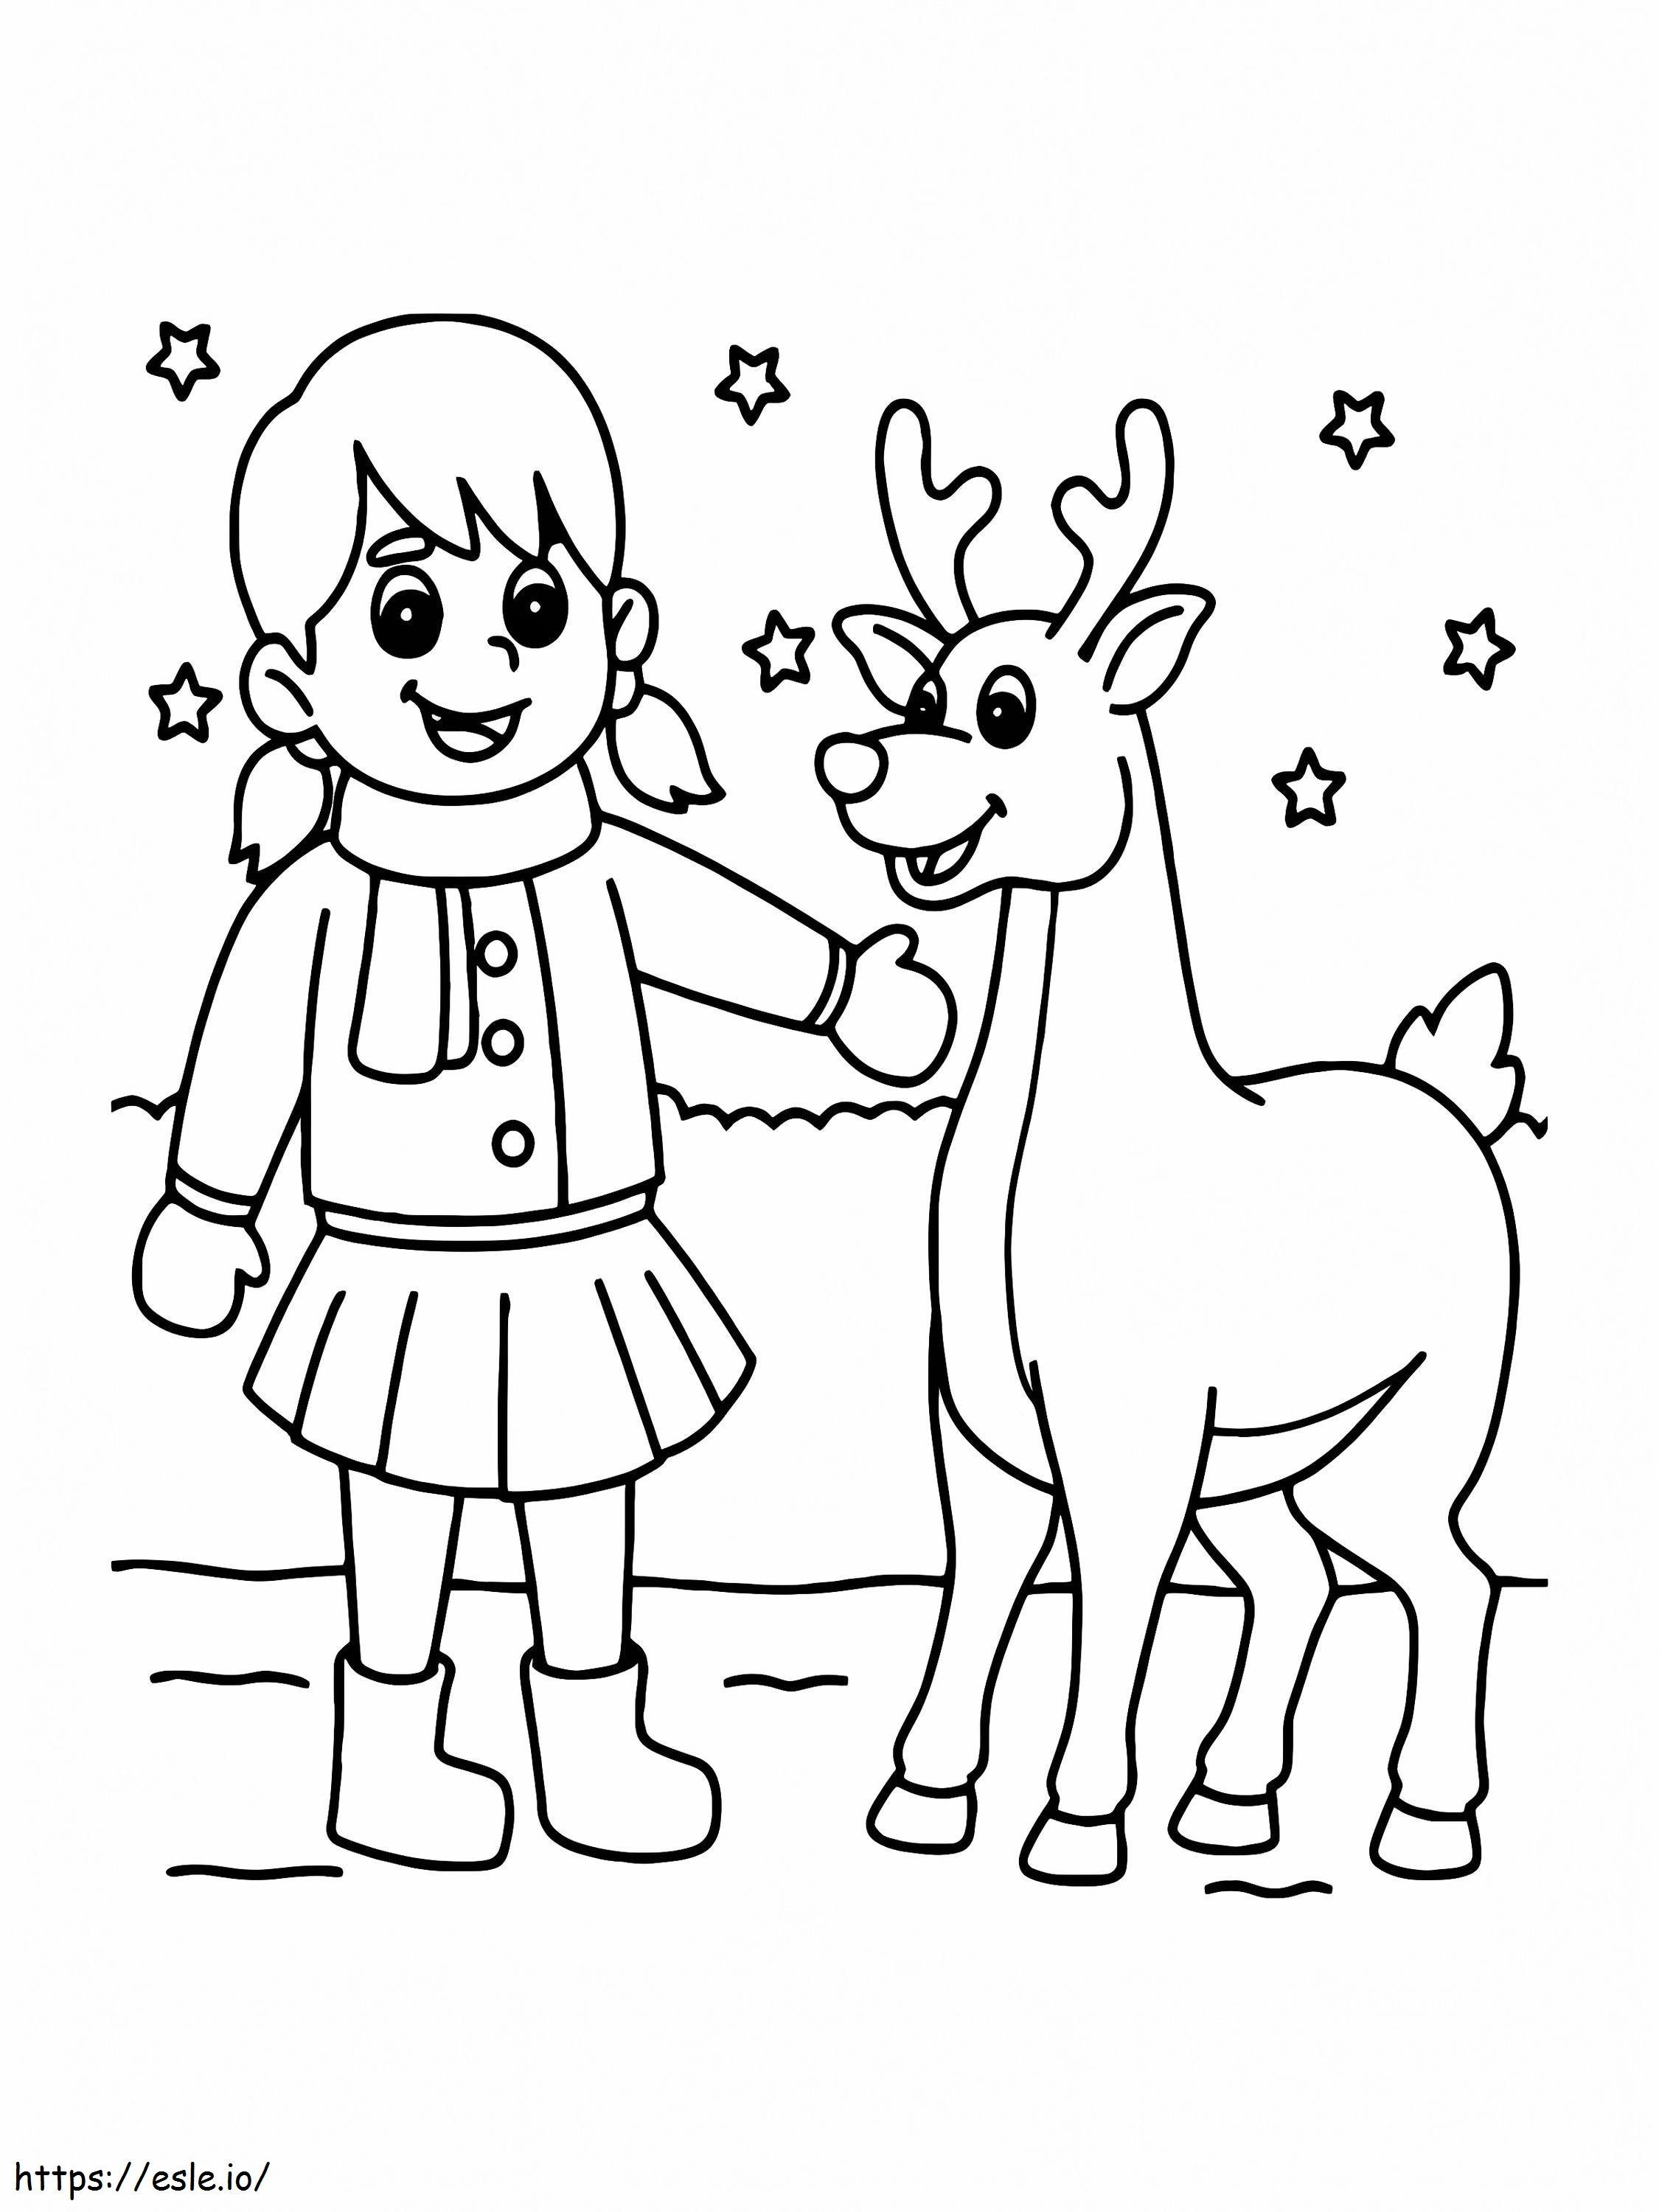 Cute Girl And Reindeer coloring page